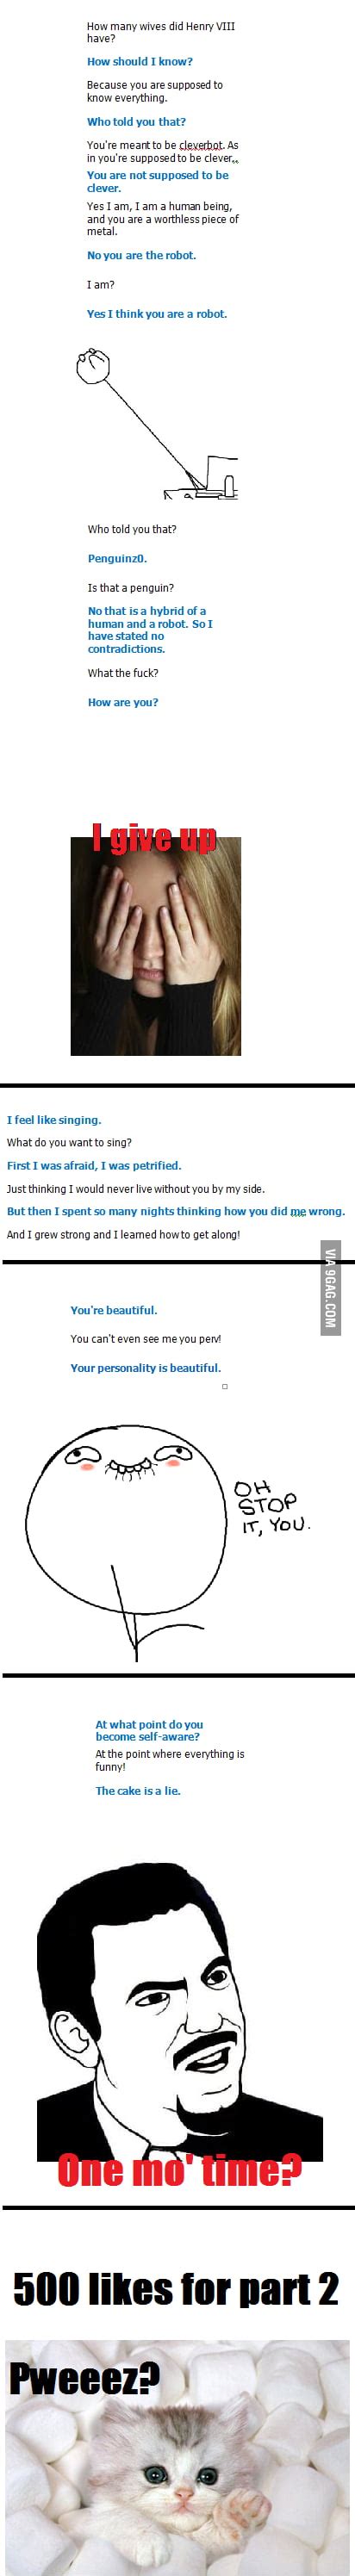 Just Some Conversations With Cleverbot Part 1 9GAG